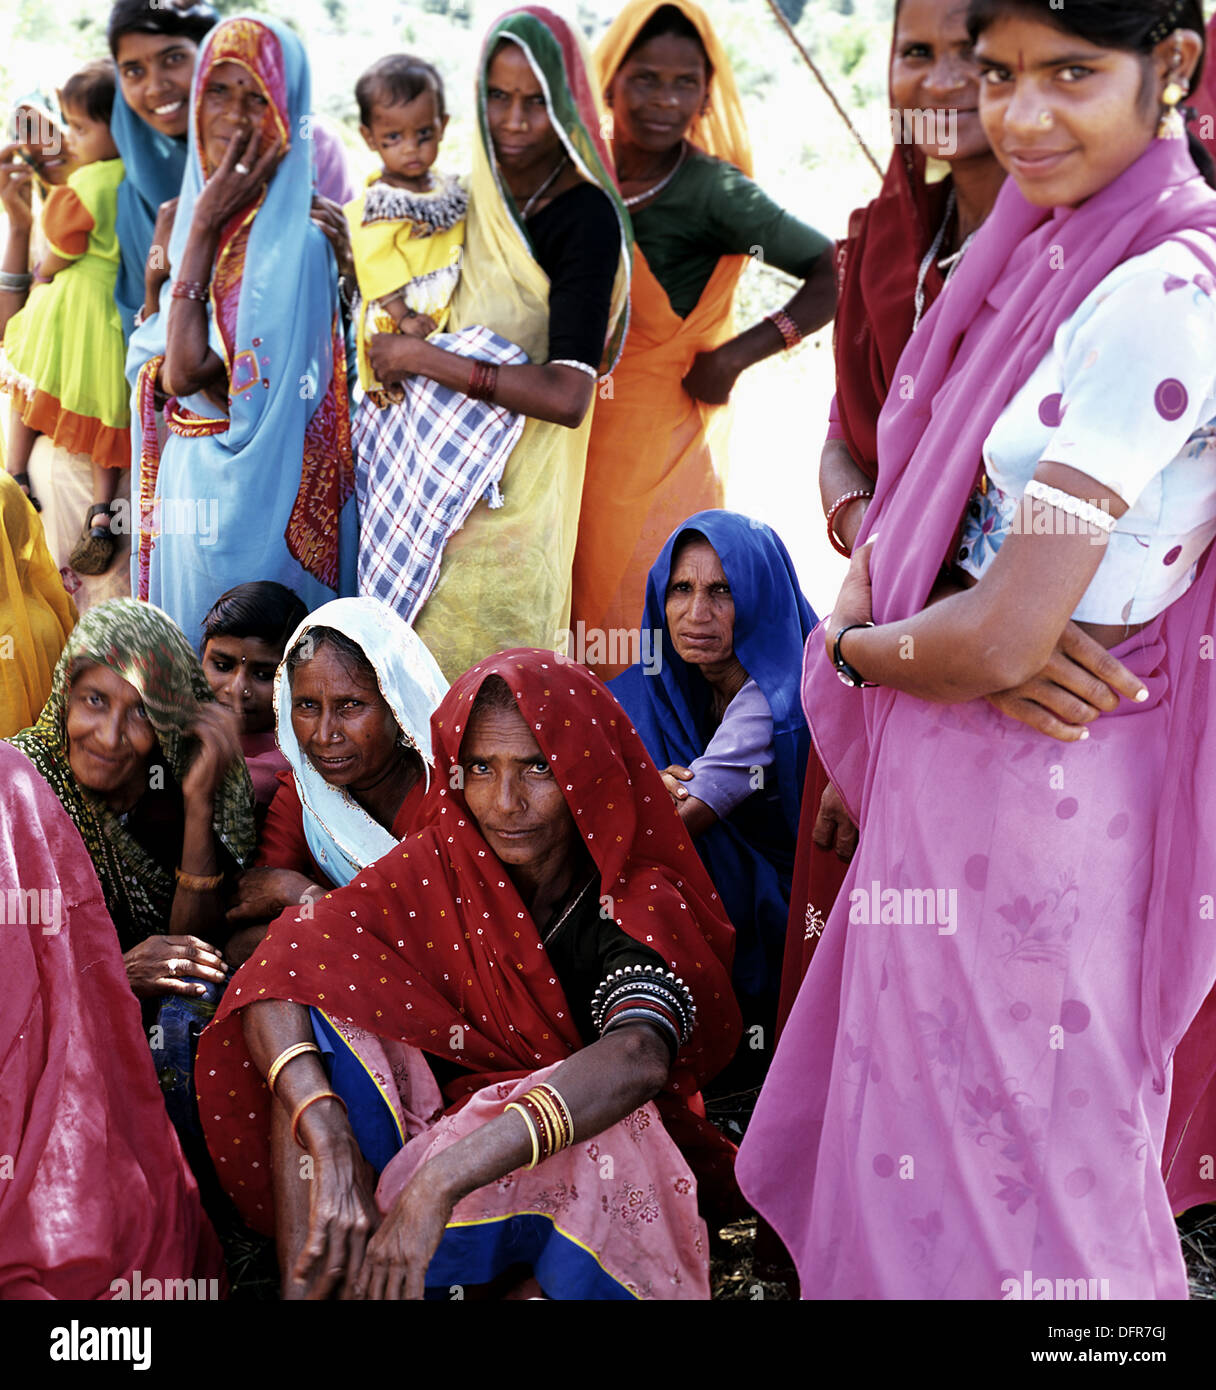 Women of the Bhils tribe look at the photographer. Rajasthan, India Stock Photo